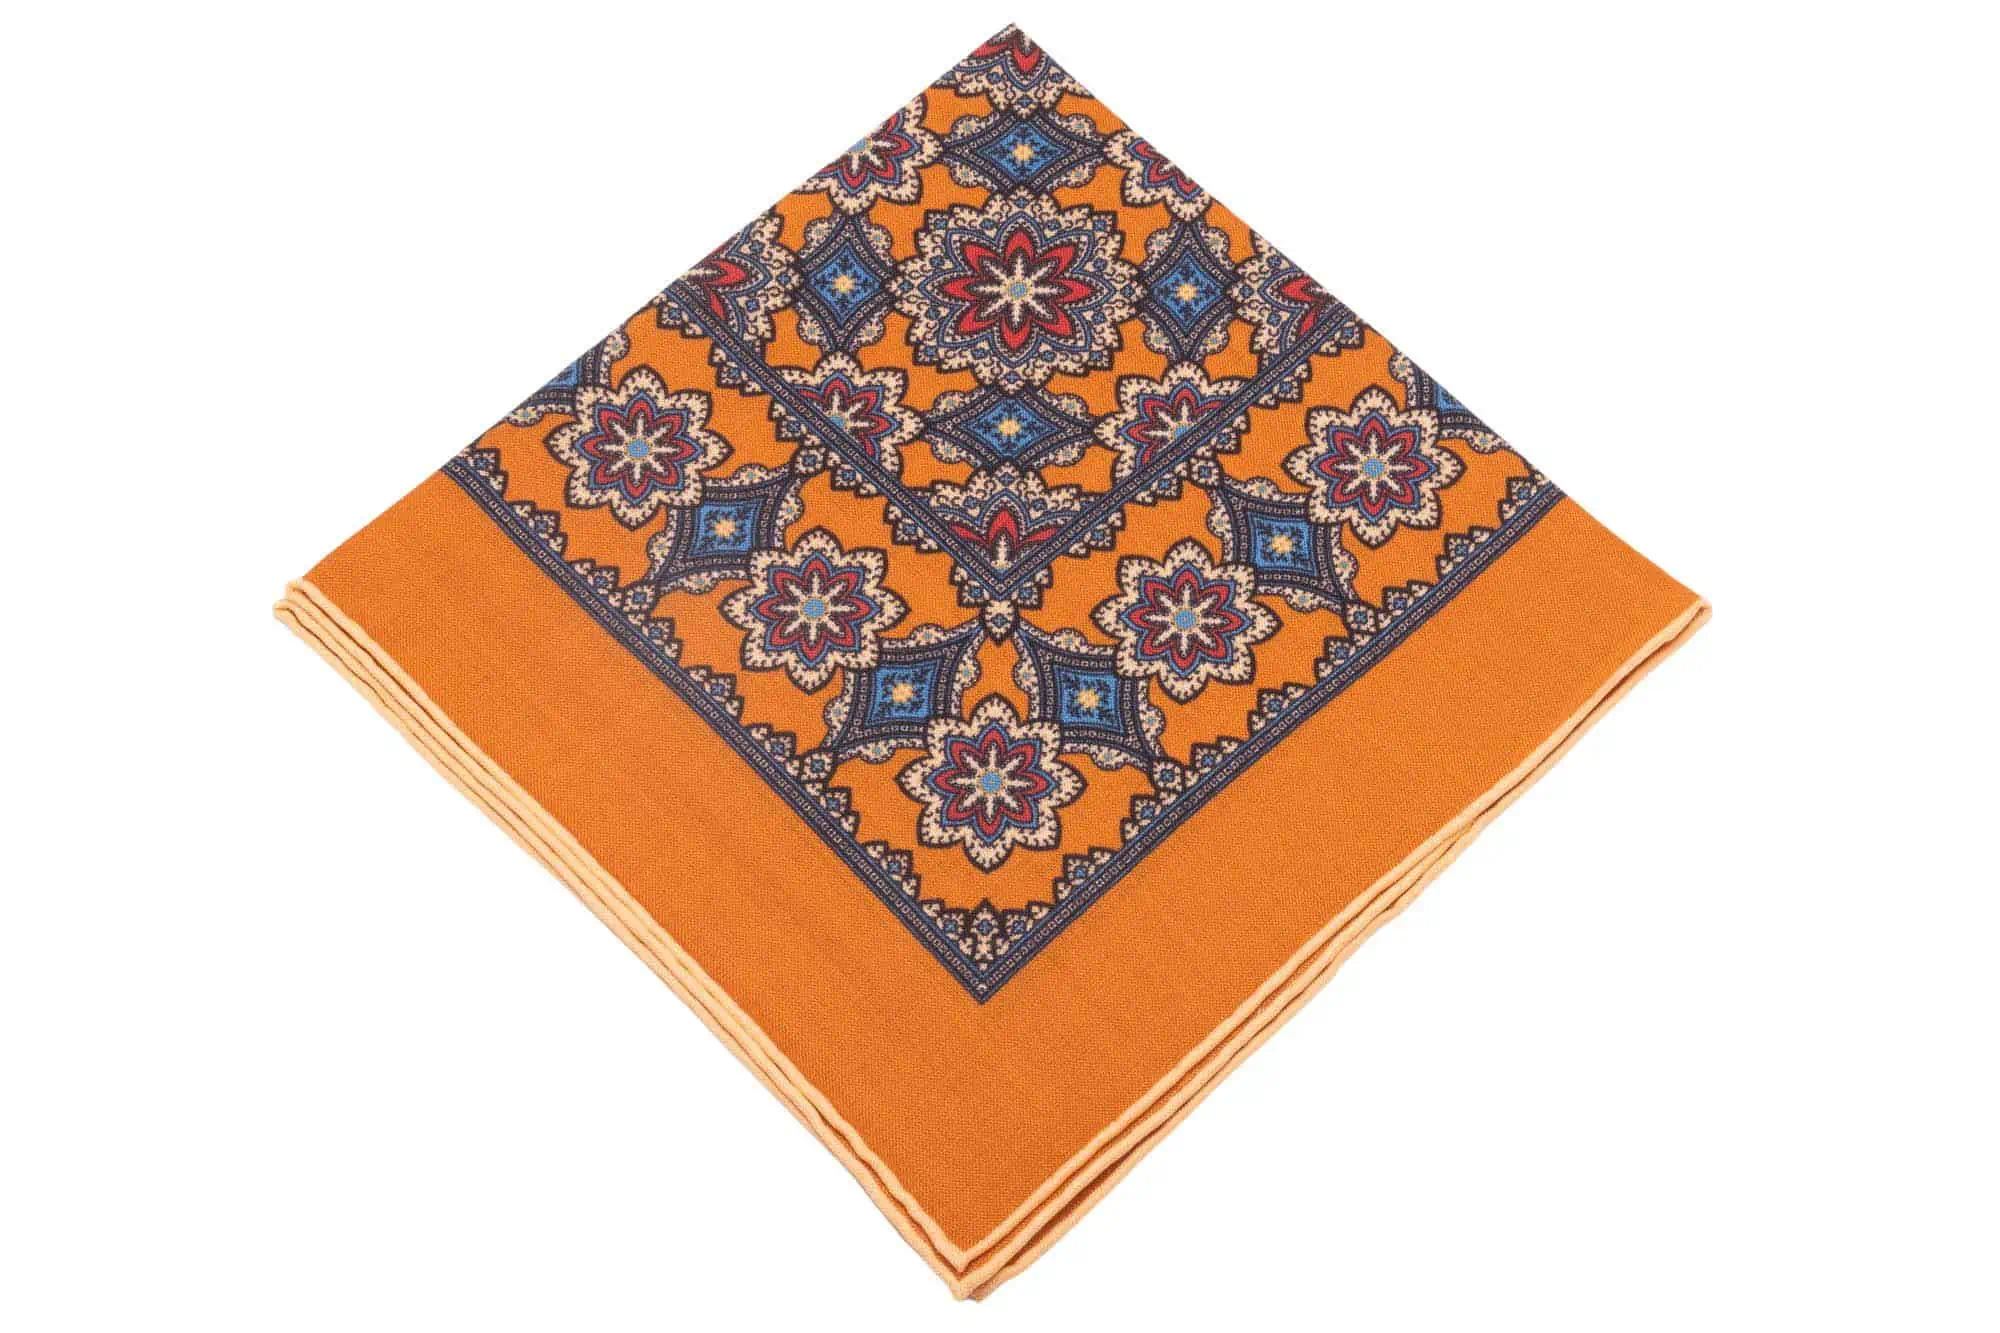 Antique Gold Ochre Silk Wool Pocket Square with Printed geometric medallions in beige, red and blue with cream contrast edge